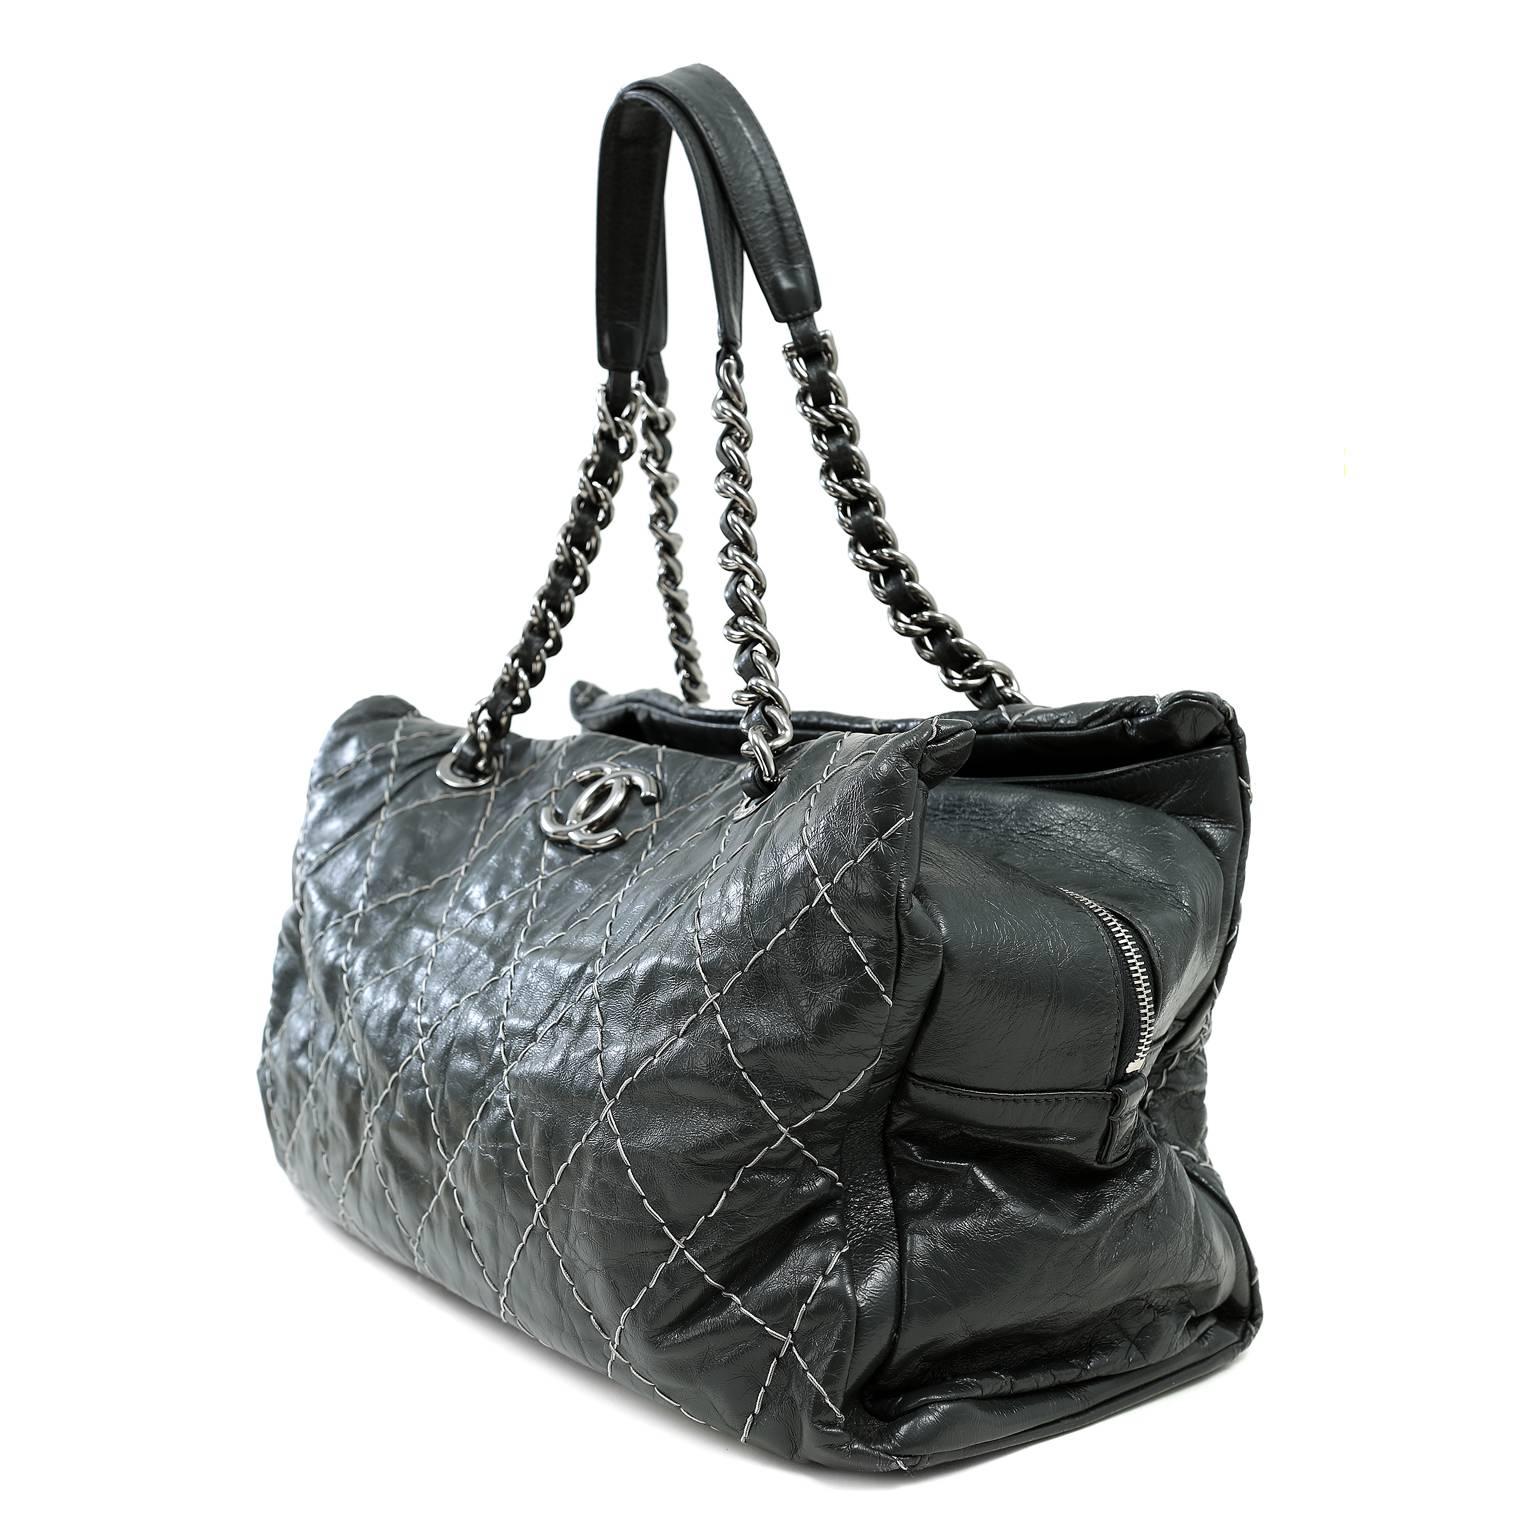 Black Chanel Charcoal Grey Distressed Leather XXL Tote For Sale